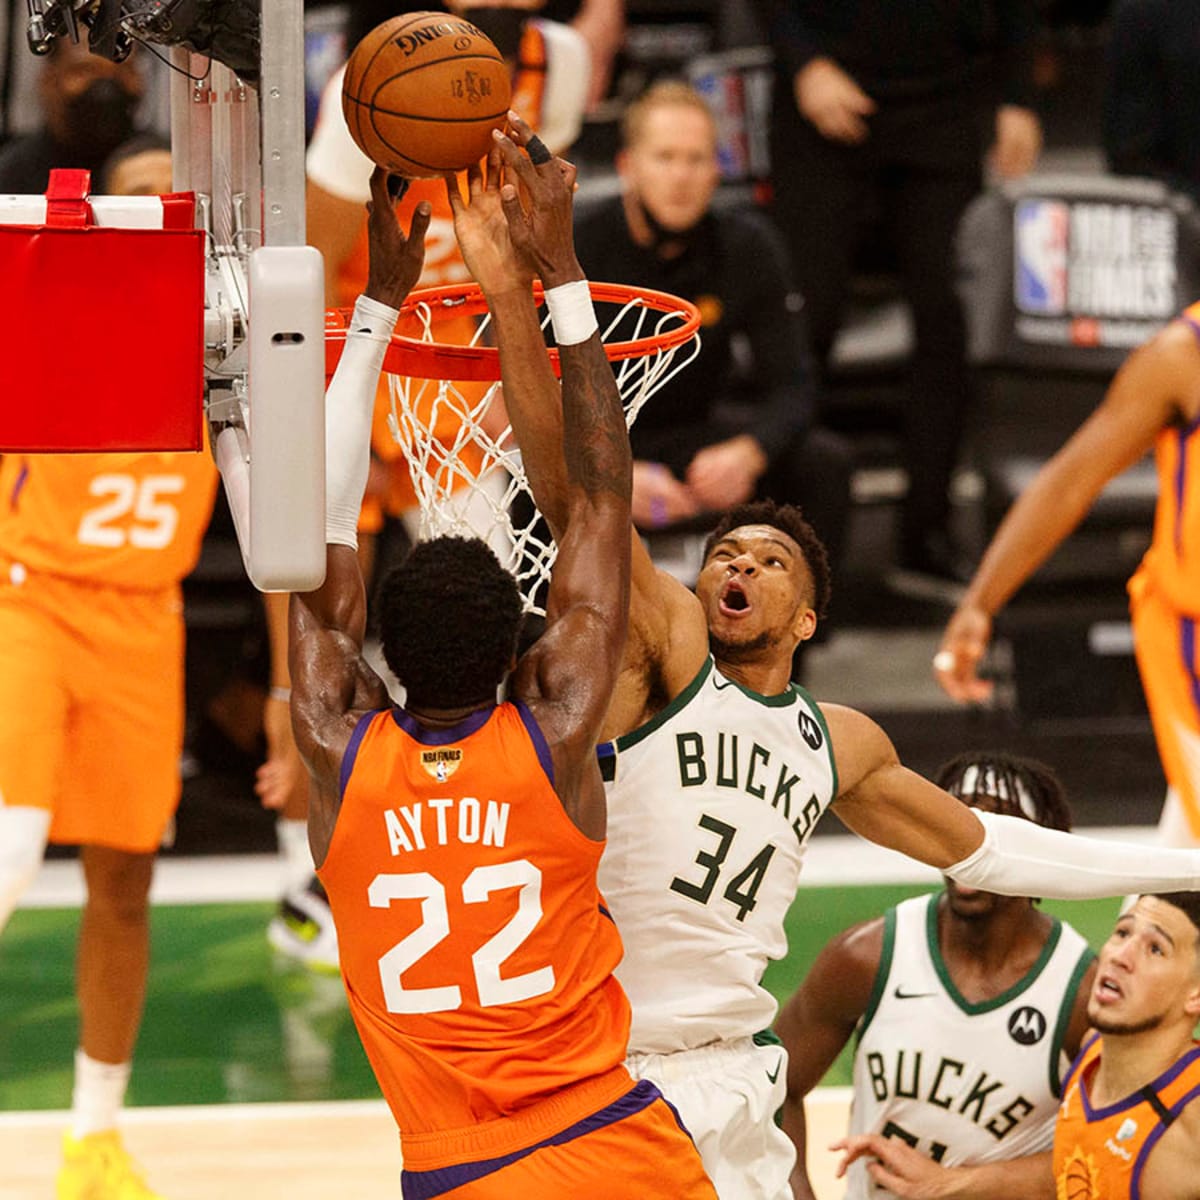 Giannis Antetokounmpo's block will go down in NBA Finals history - Sports Illustrated